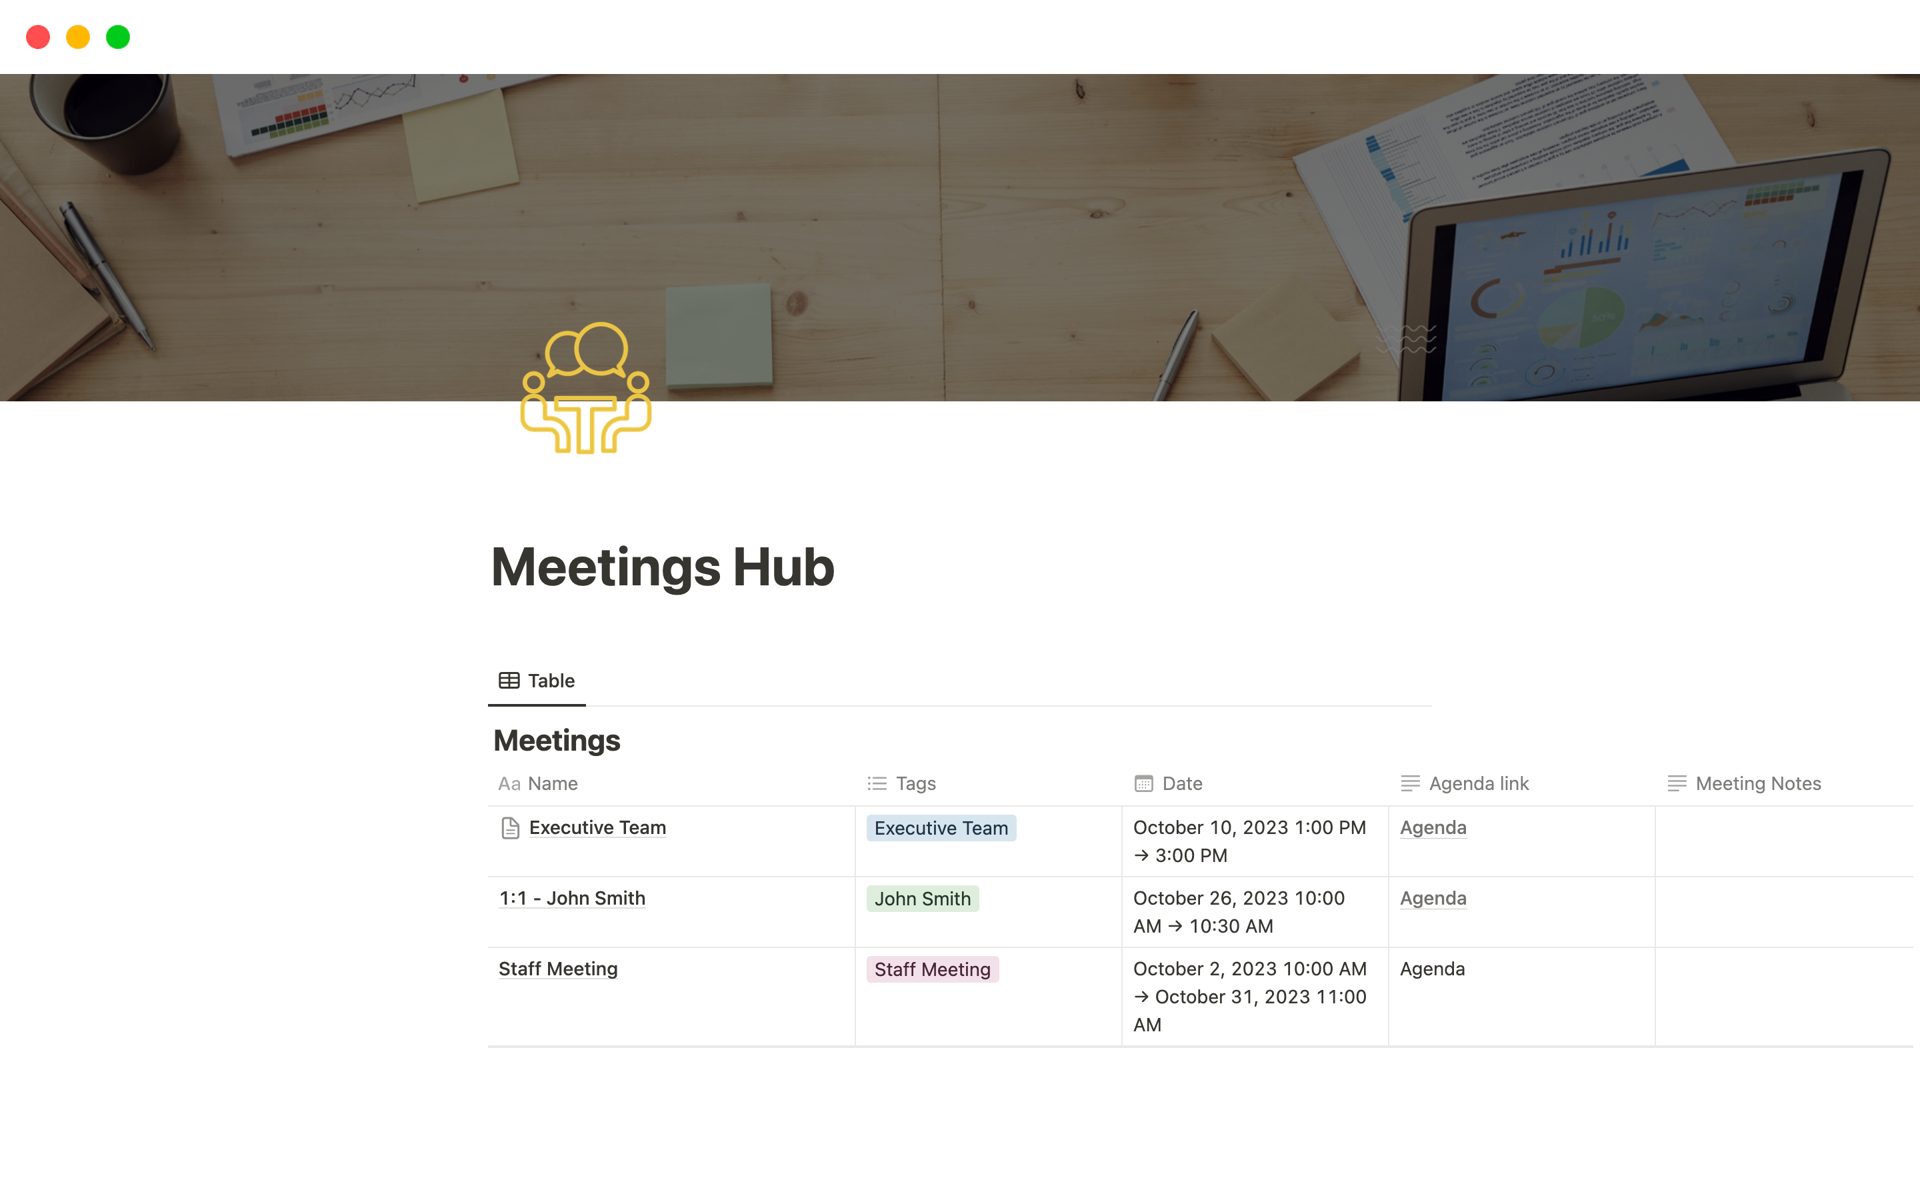 Organize your meetings, tag by person, department, etc. Link meeting minutes and notes & more.